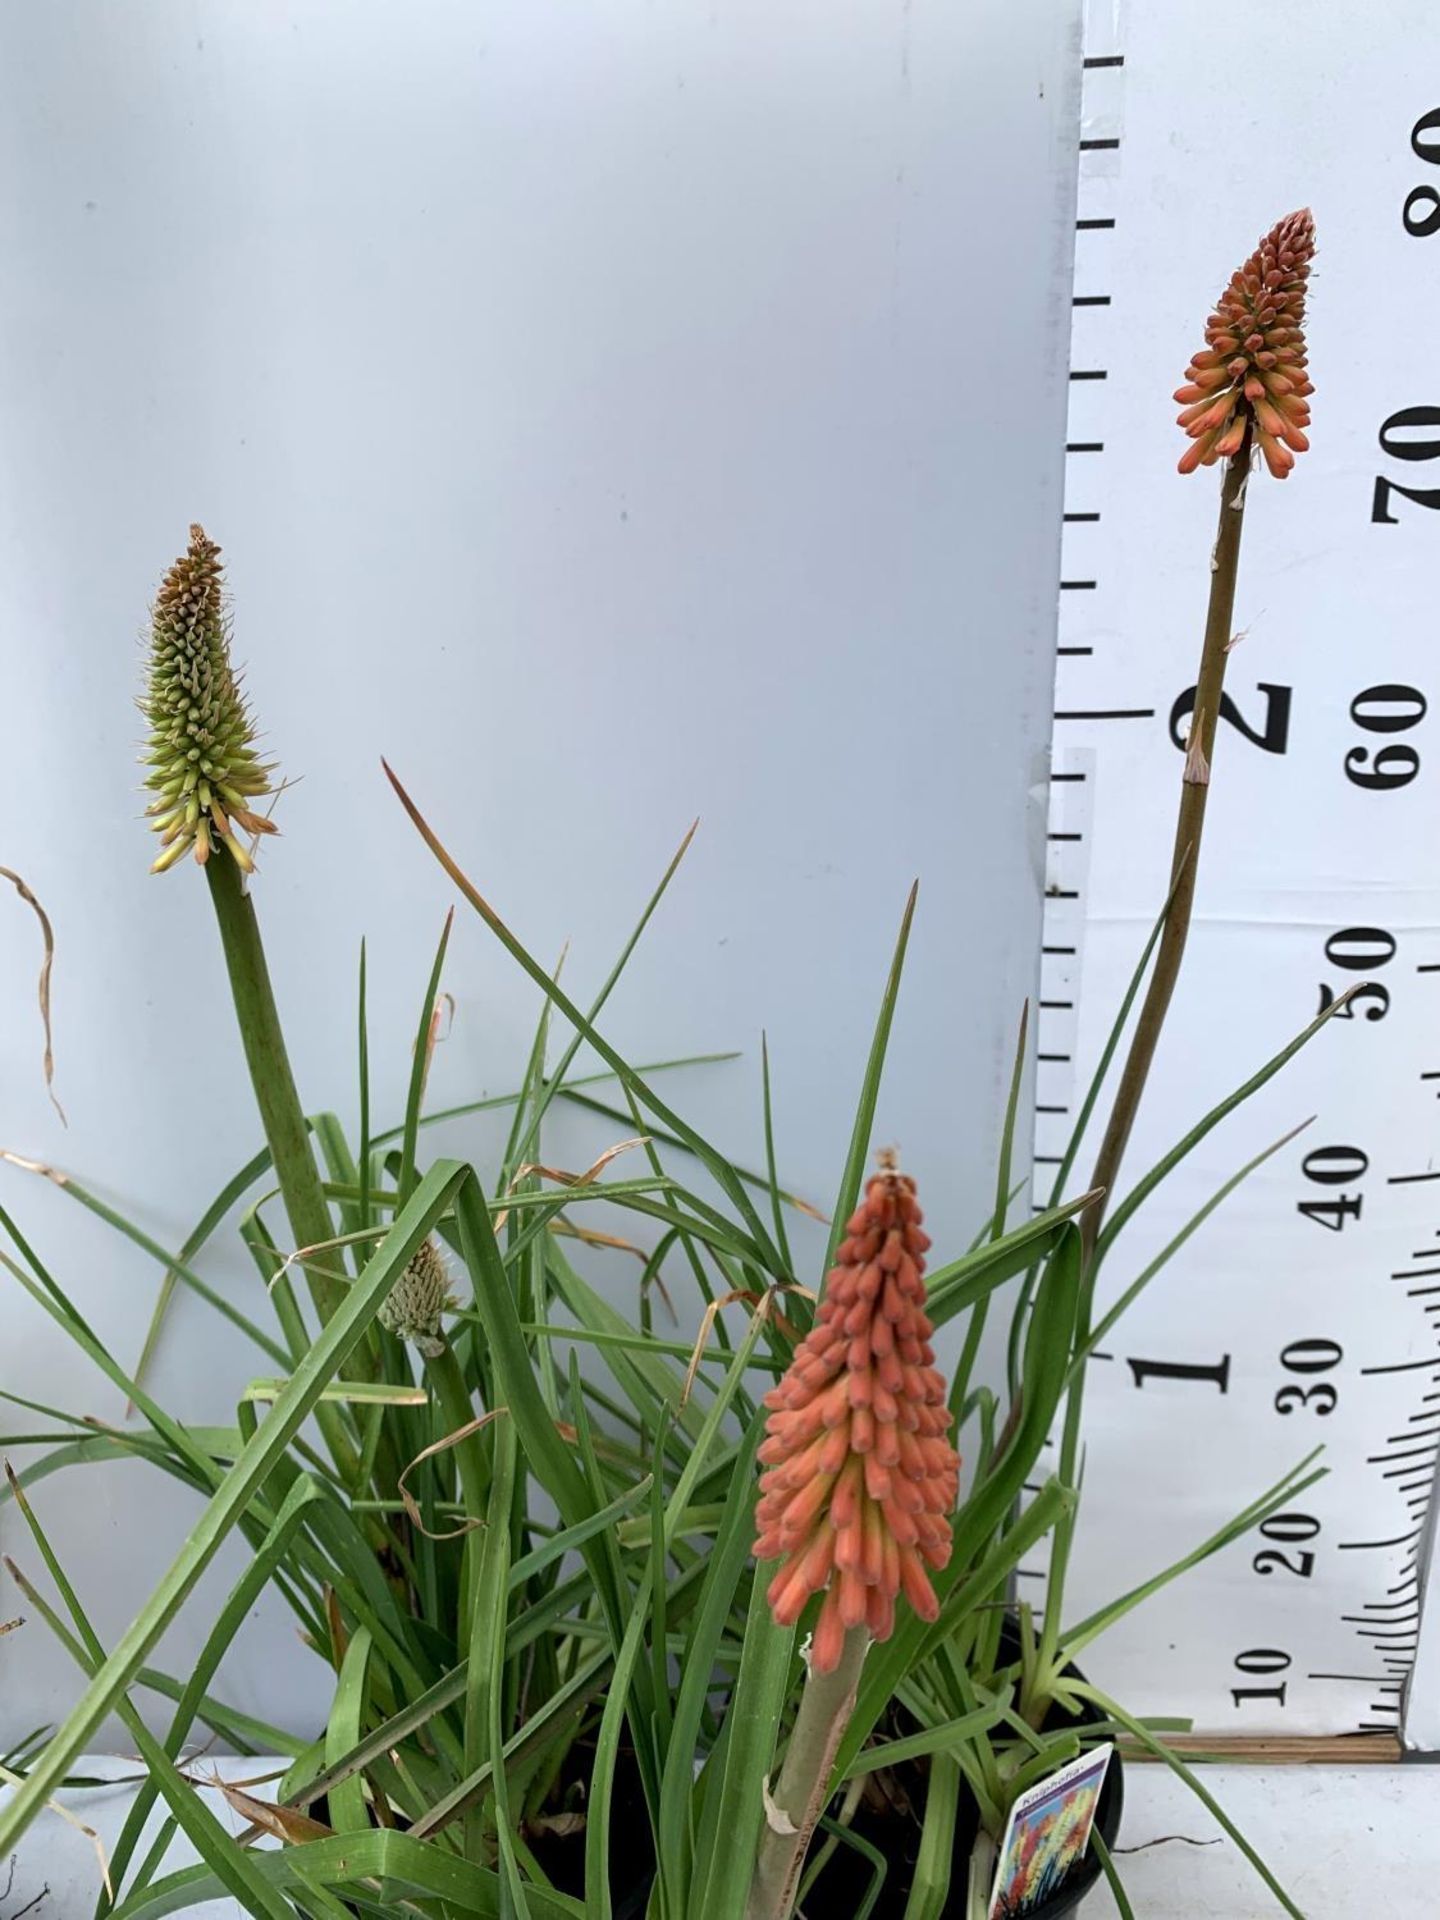 THREE KNIPHOFIA RED HOT POKER 'FLAMENCO' IN 2 LTR POTS APPROX 70- 80CM IN HEIGHT PLUS VAT TO BE SOLD - Image 6 of 8